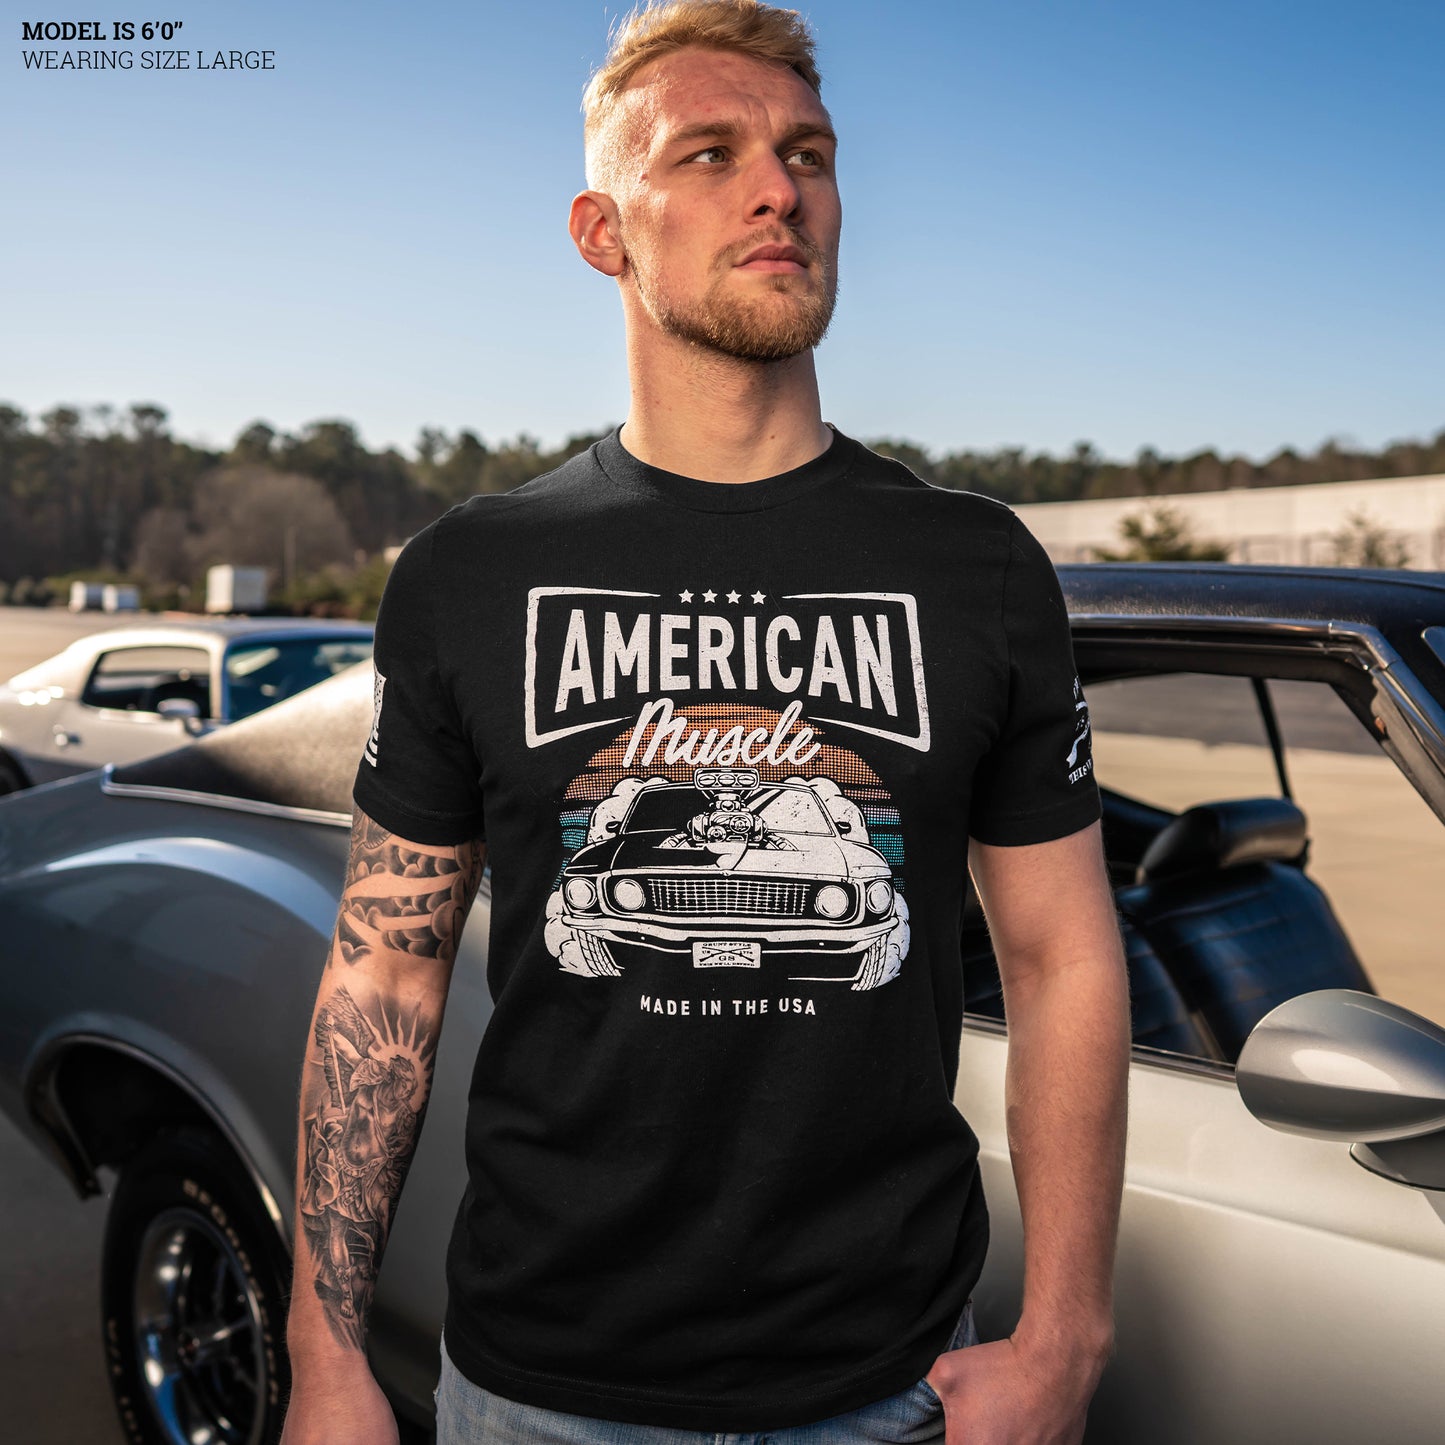 American Muscle - Made in the USA 